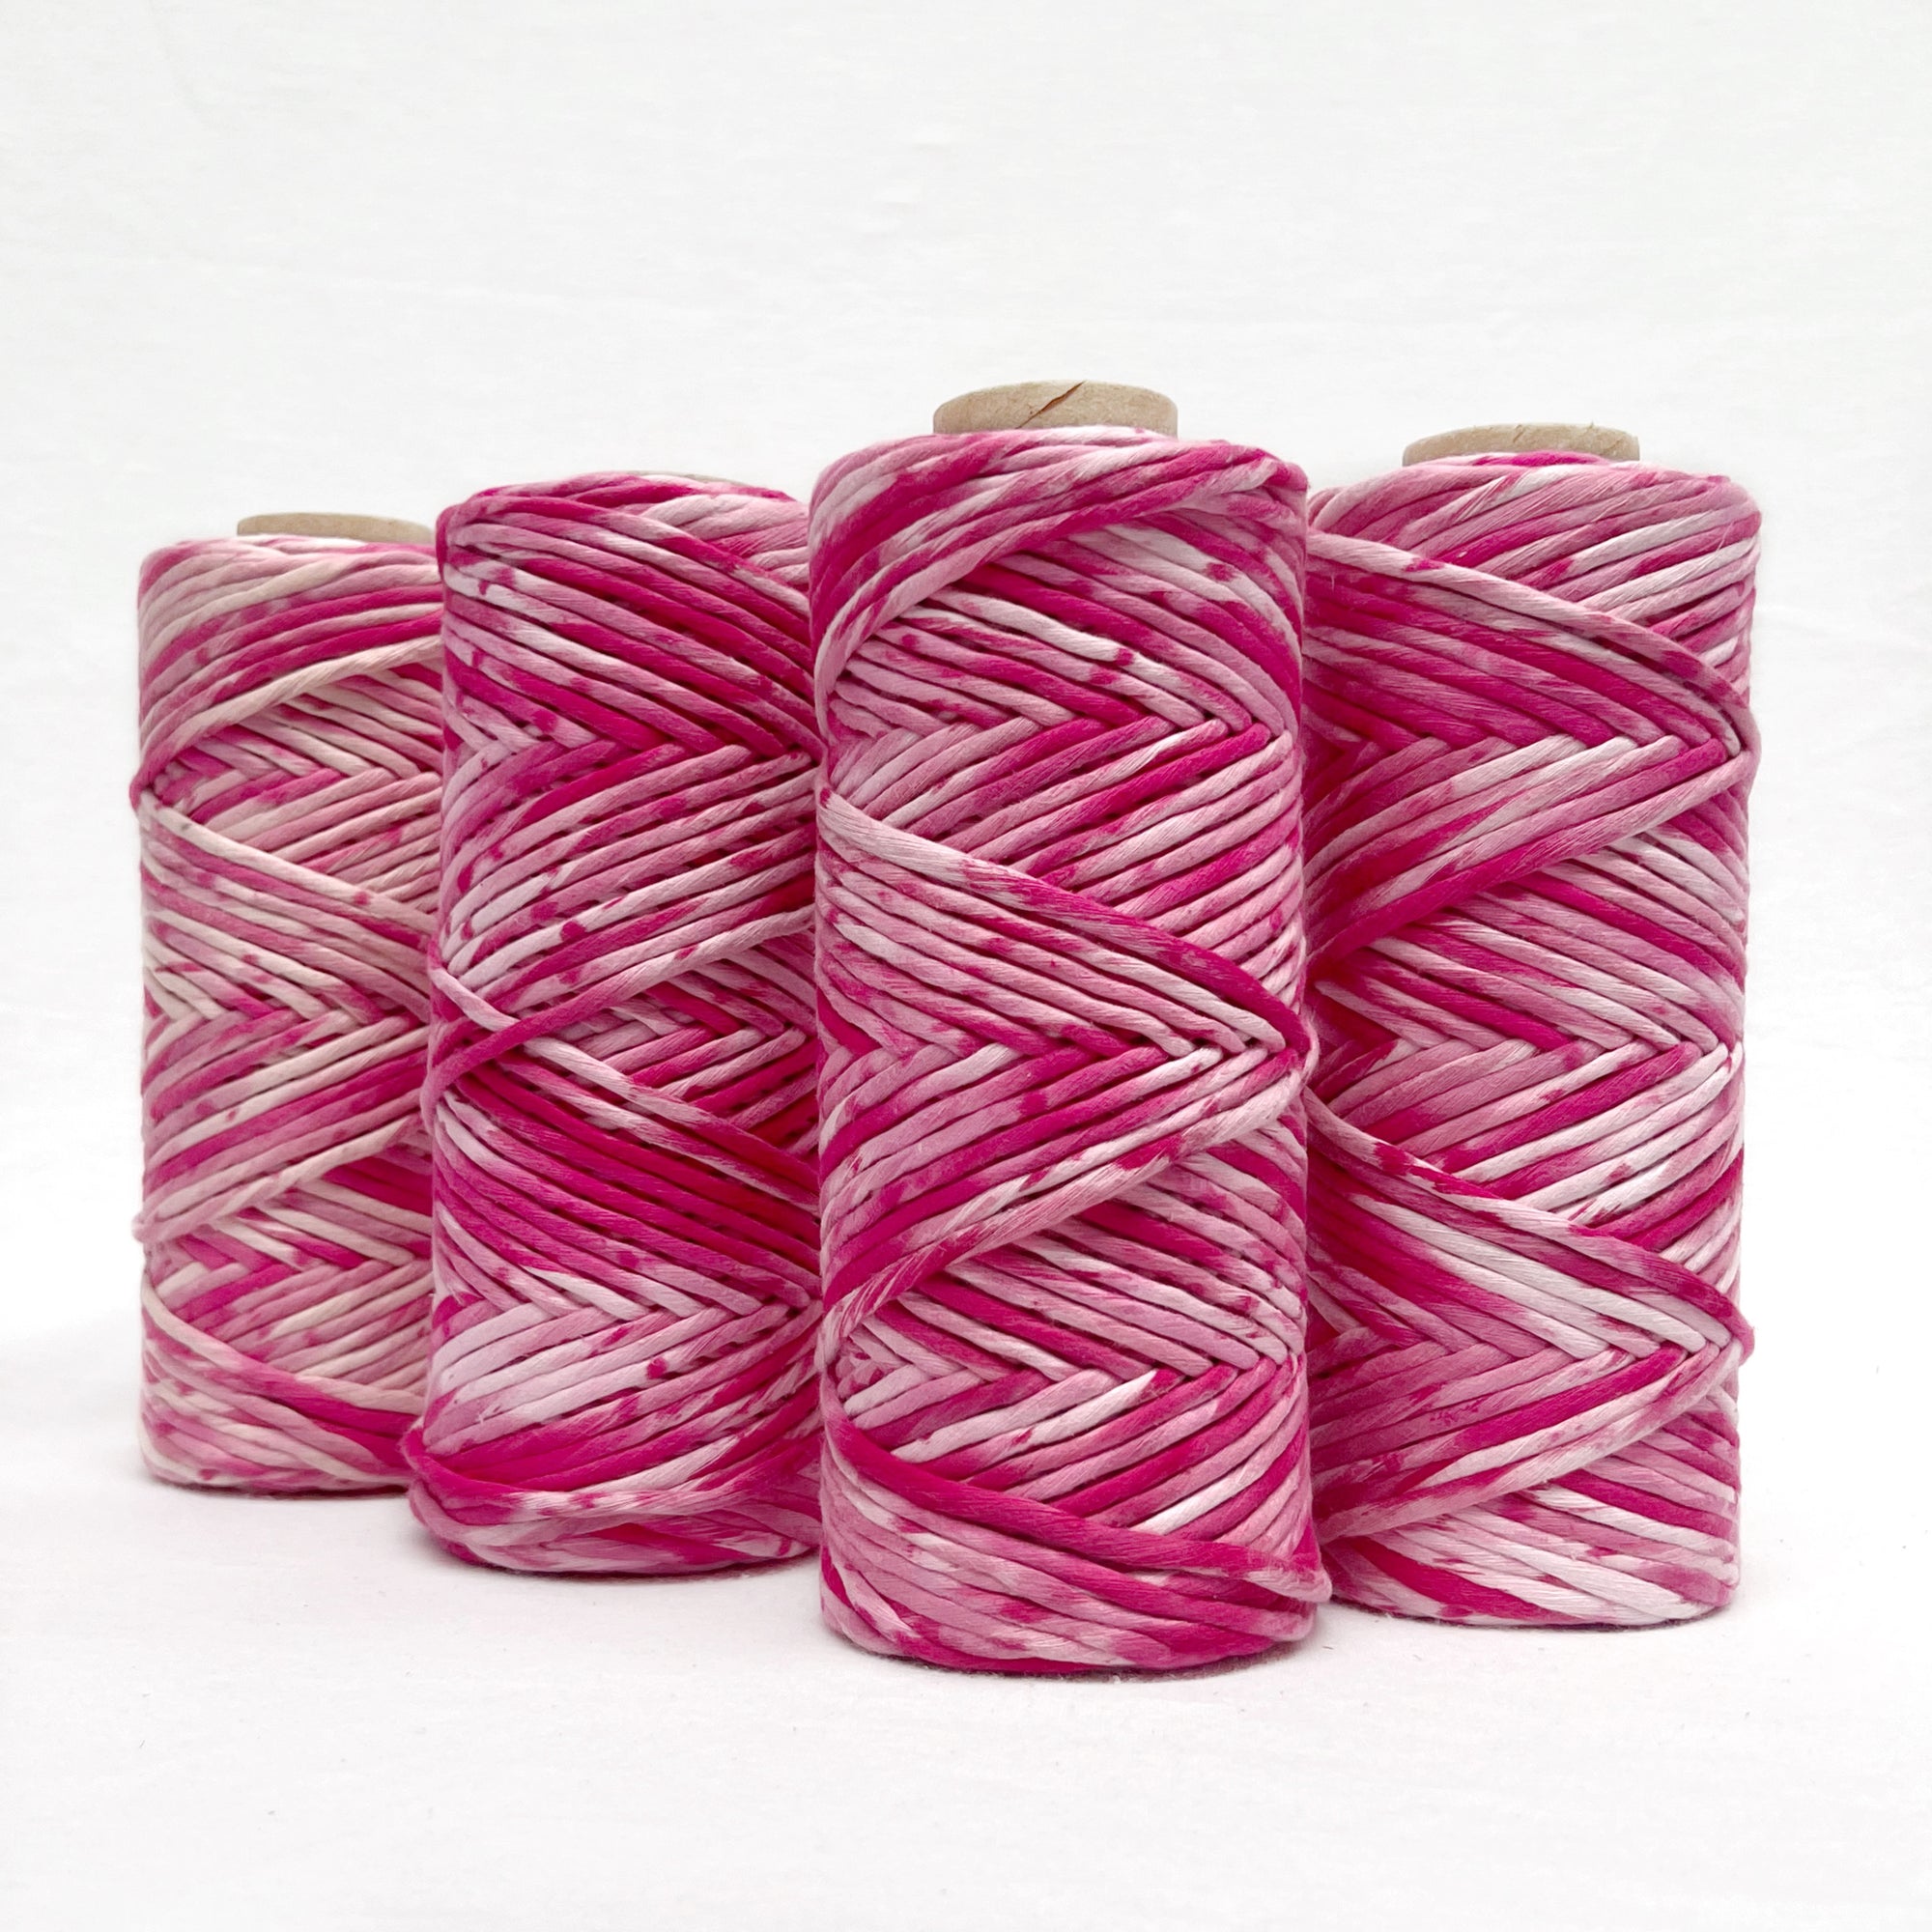 bright pink macrame cord standing in line against white wall